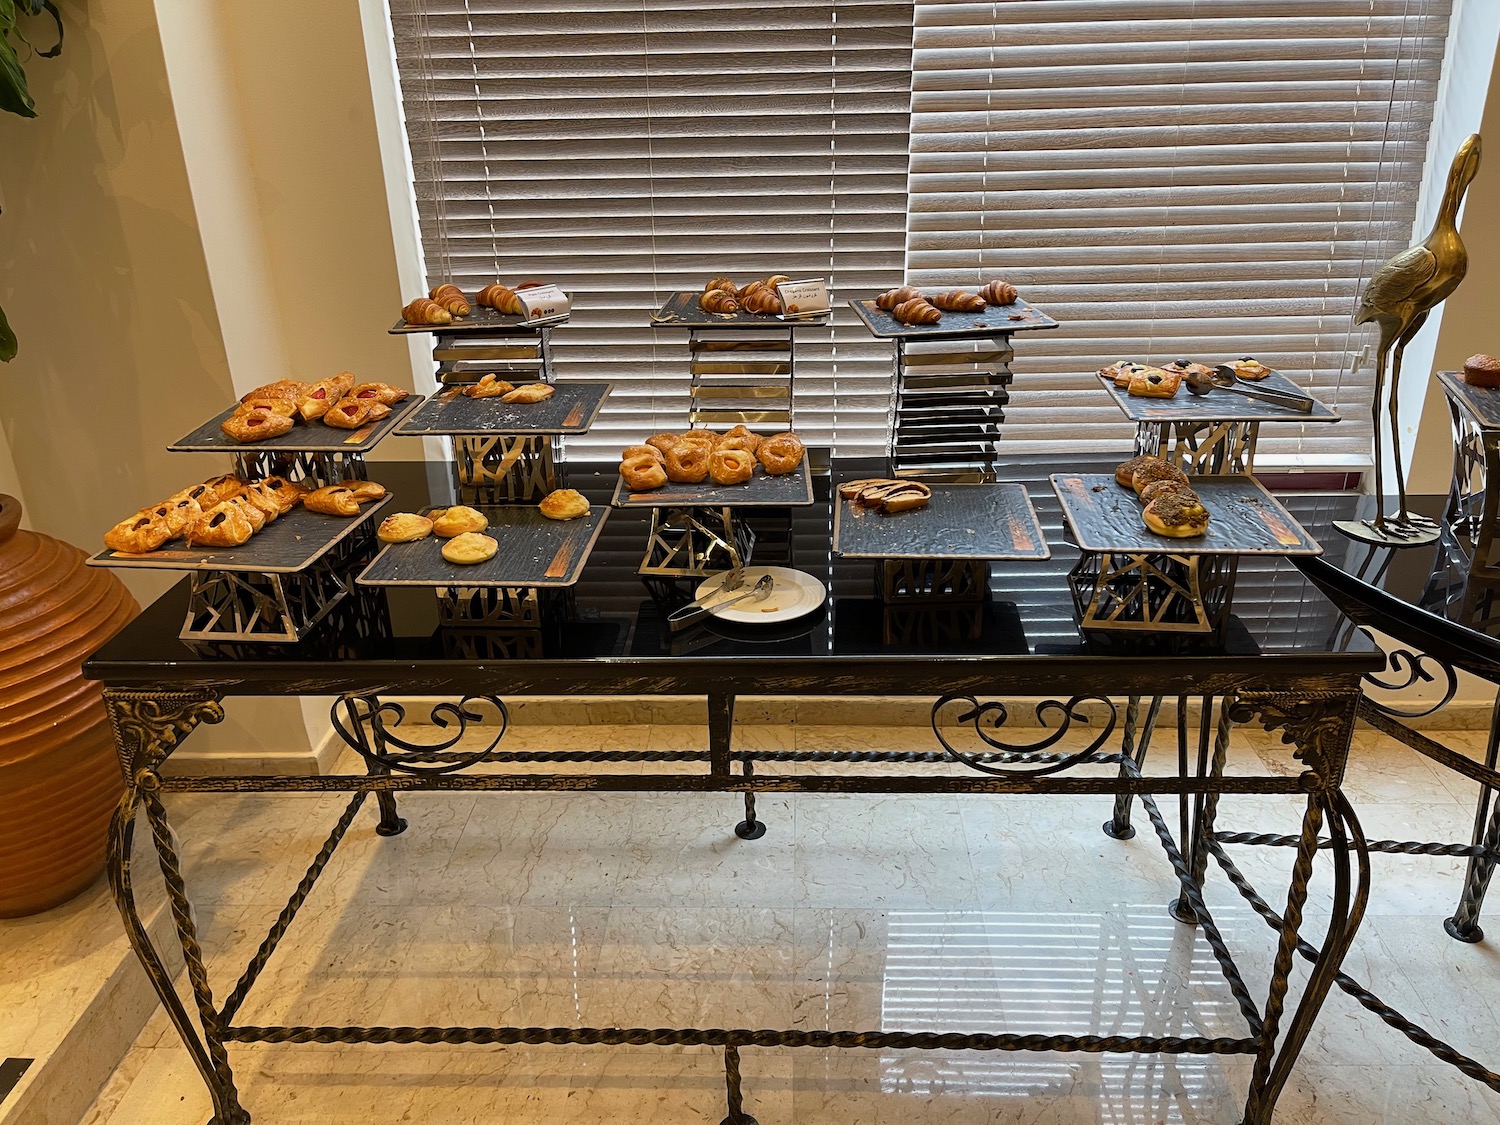 a table with trays of pastries